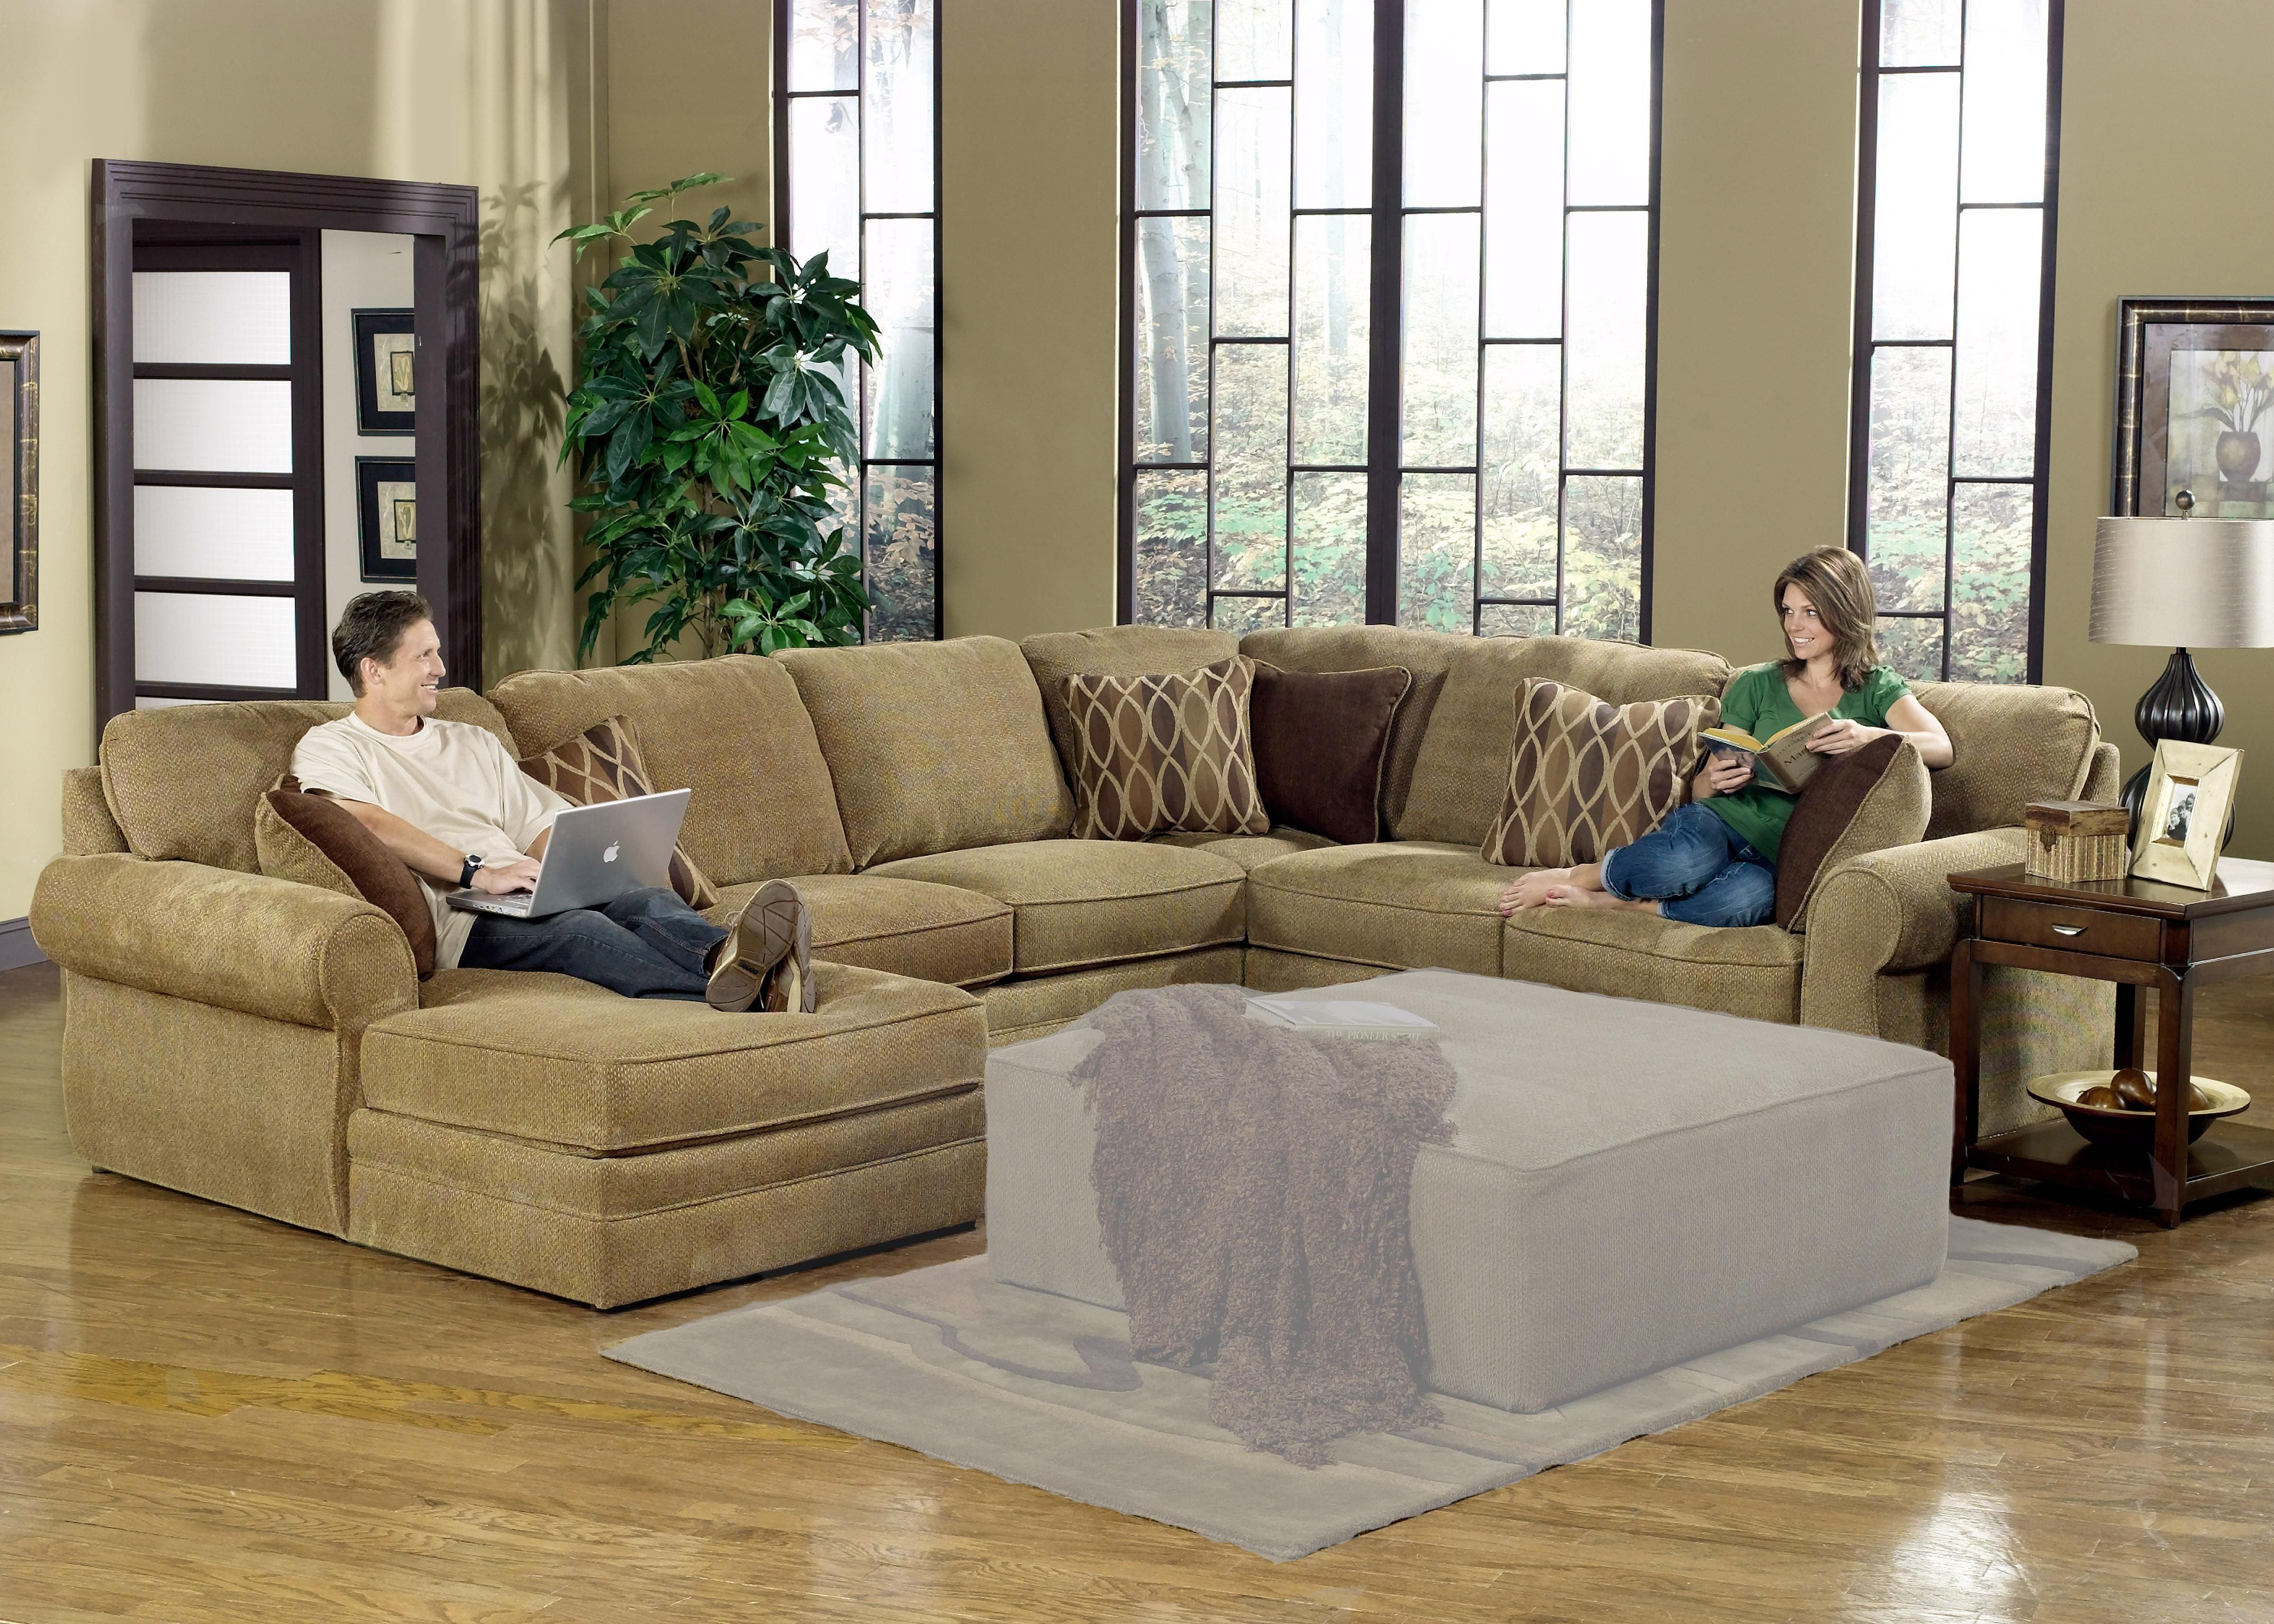 Furniture: Sectional Sofa Design Adorable Large U Shaped Sectional Sofa With Regard To Huge U Shaped Sectionals (View 10 of 10)